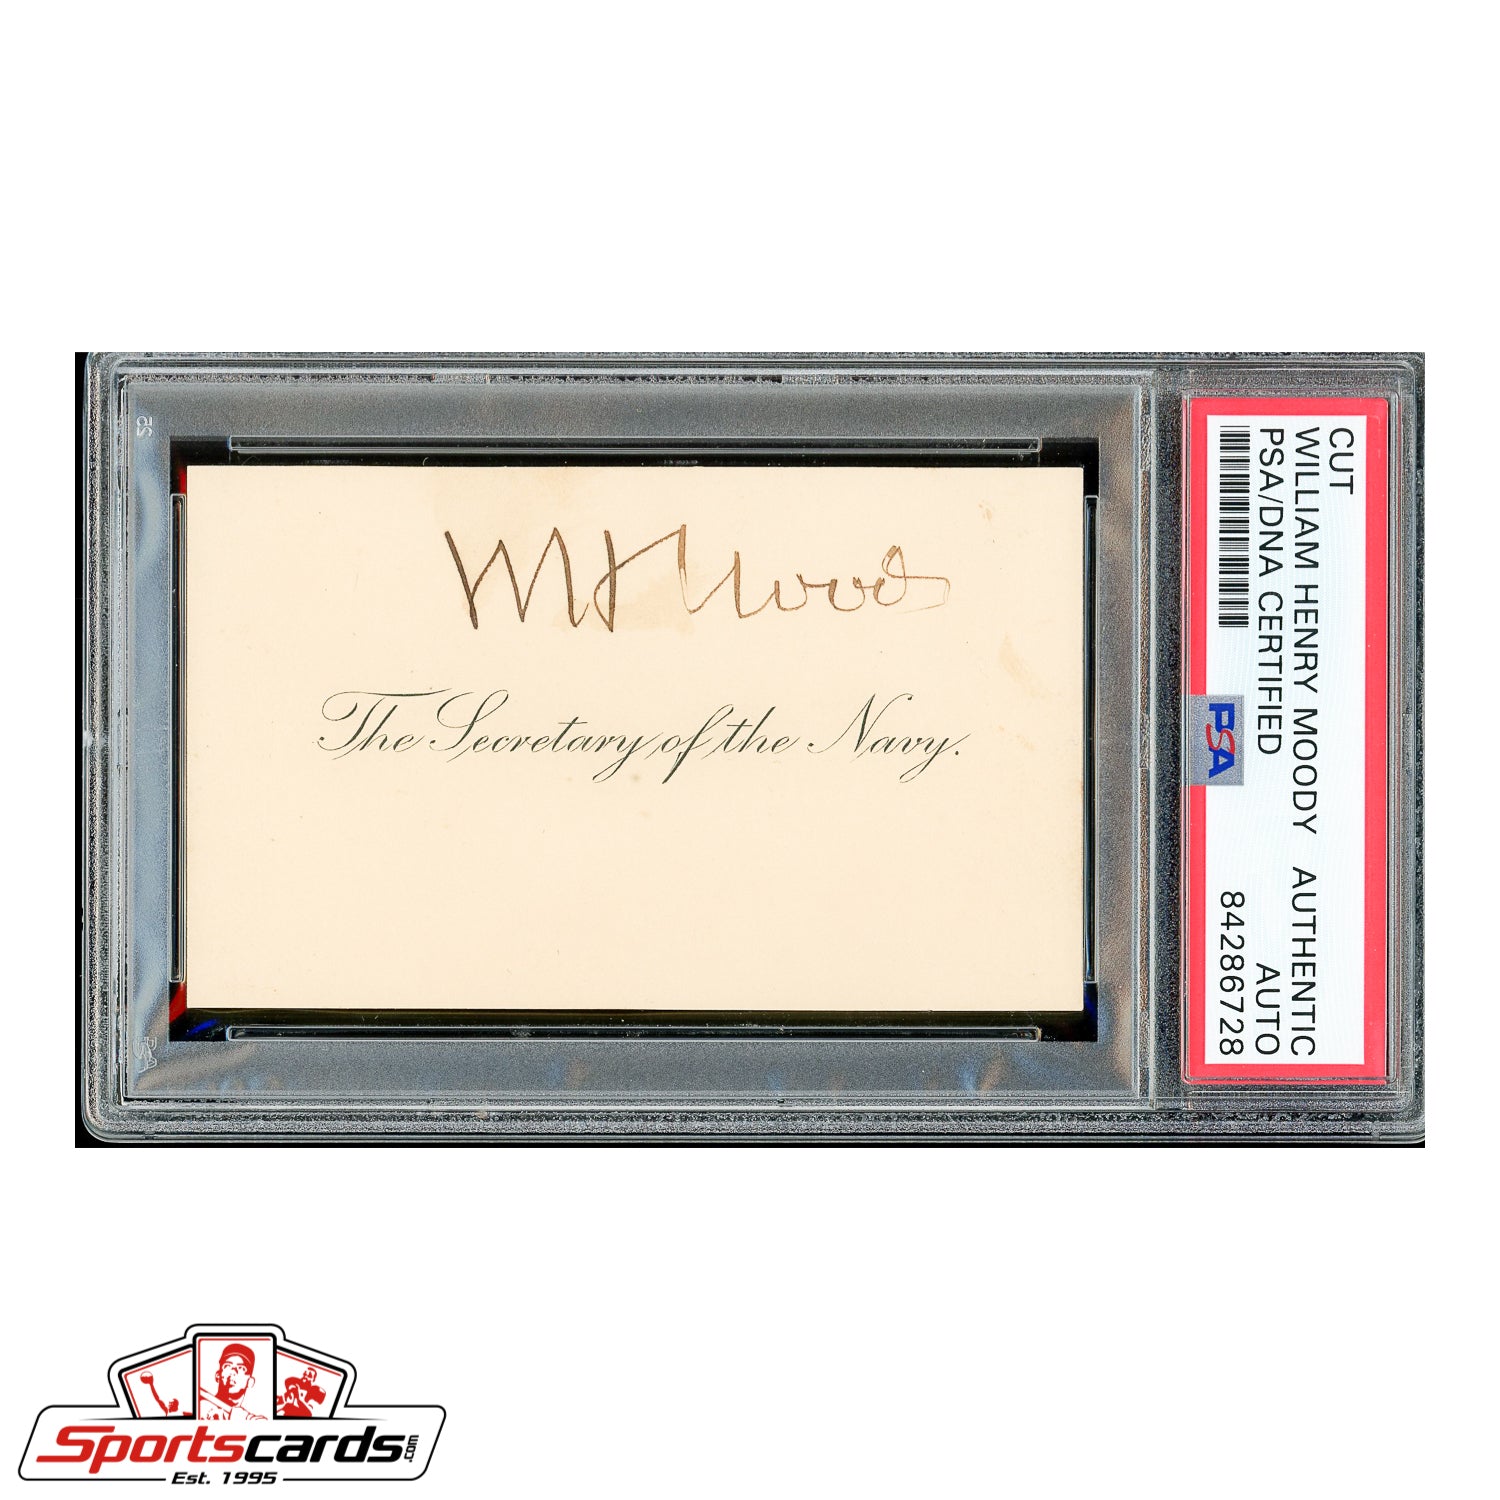 Supreme Court Justice William Henry Moody Signed Autographed Card - PSA/DNA